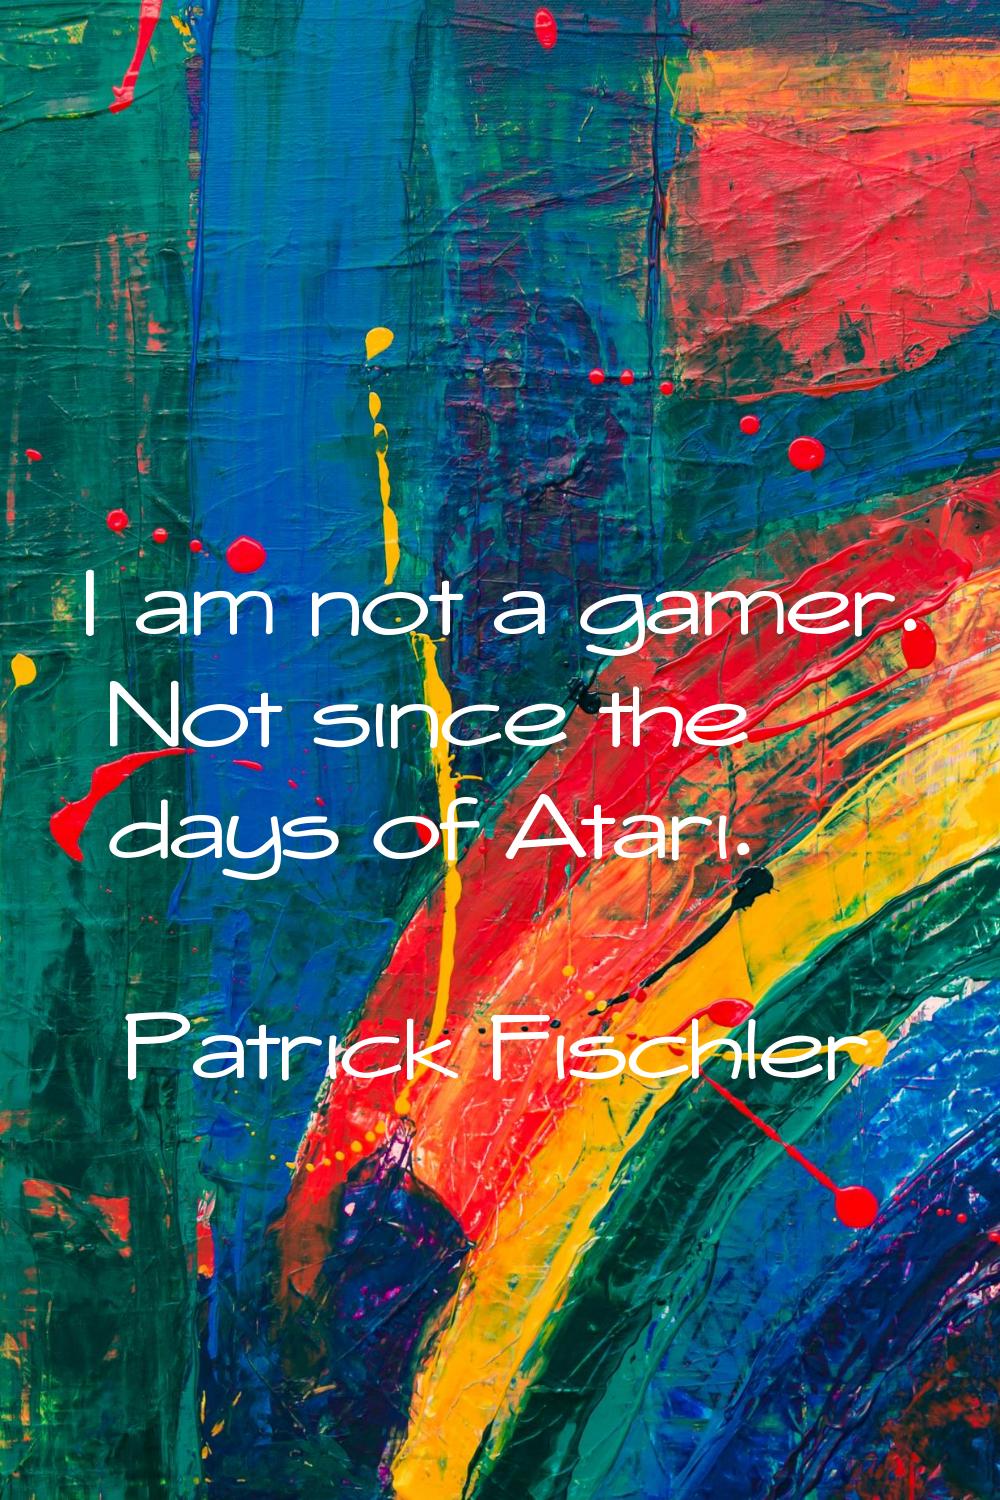 I am not a gamer. Not since the days of Atari.